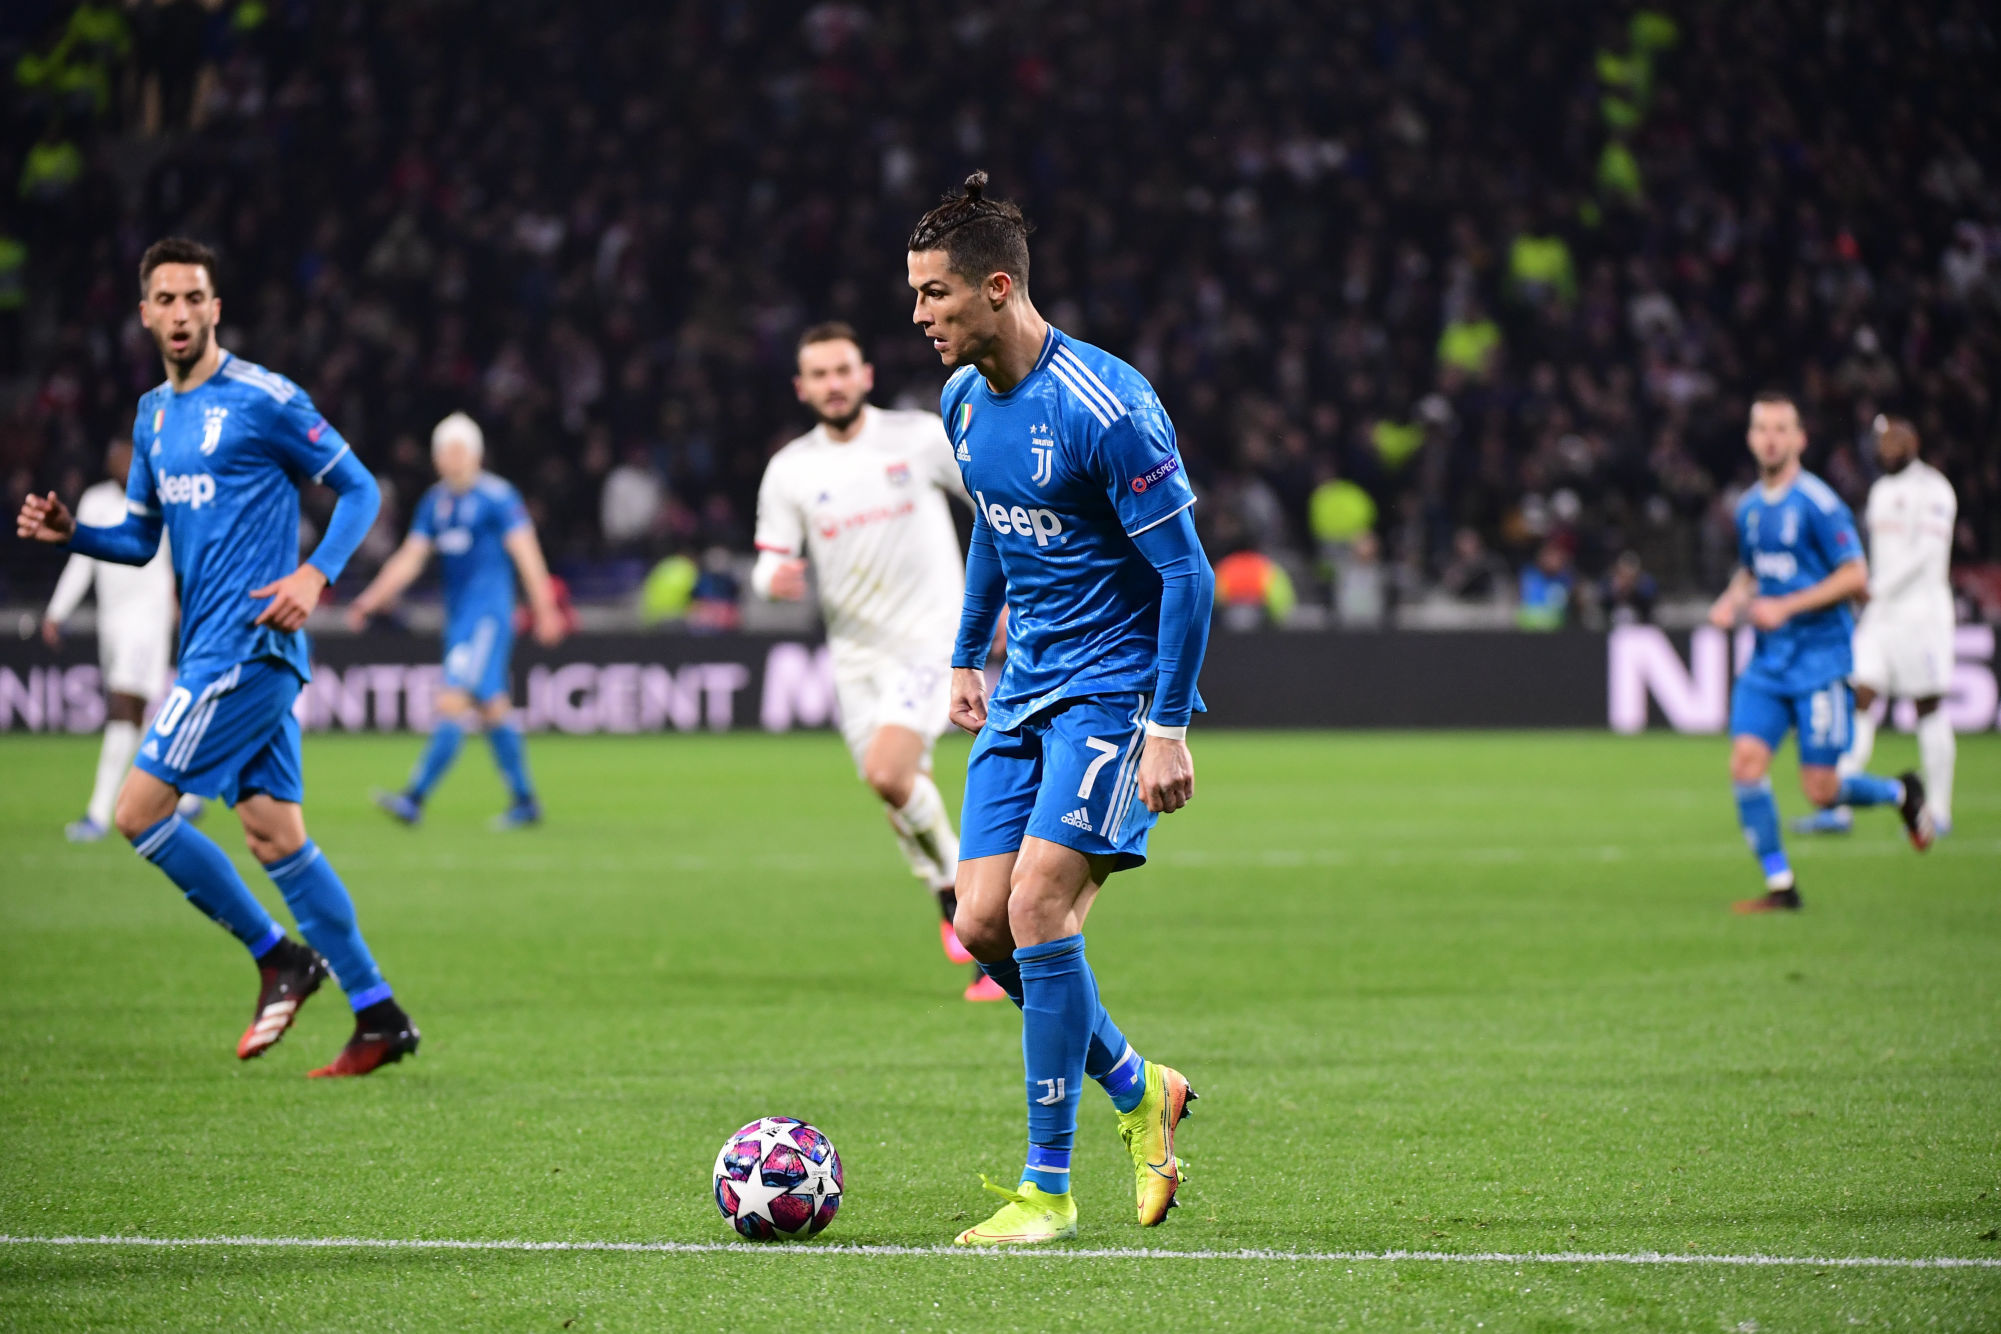 Cristiano RONALDO of Juventus during the UEFA Champions League round of 16 first leg match between Lyon and Juventus at Groupama Stadium on February 26, 2020 in Lyon, France. (Photo by Dave Winter/Icon Sport) - Cristiano RONALDO - Groupama Stadium - Lyon (France)